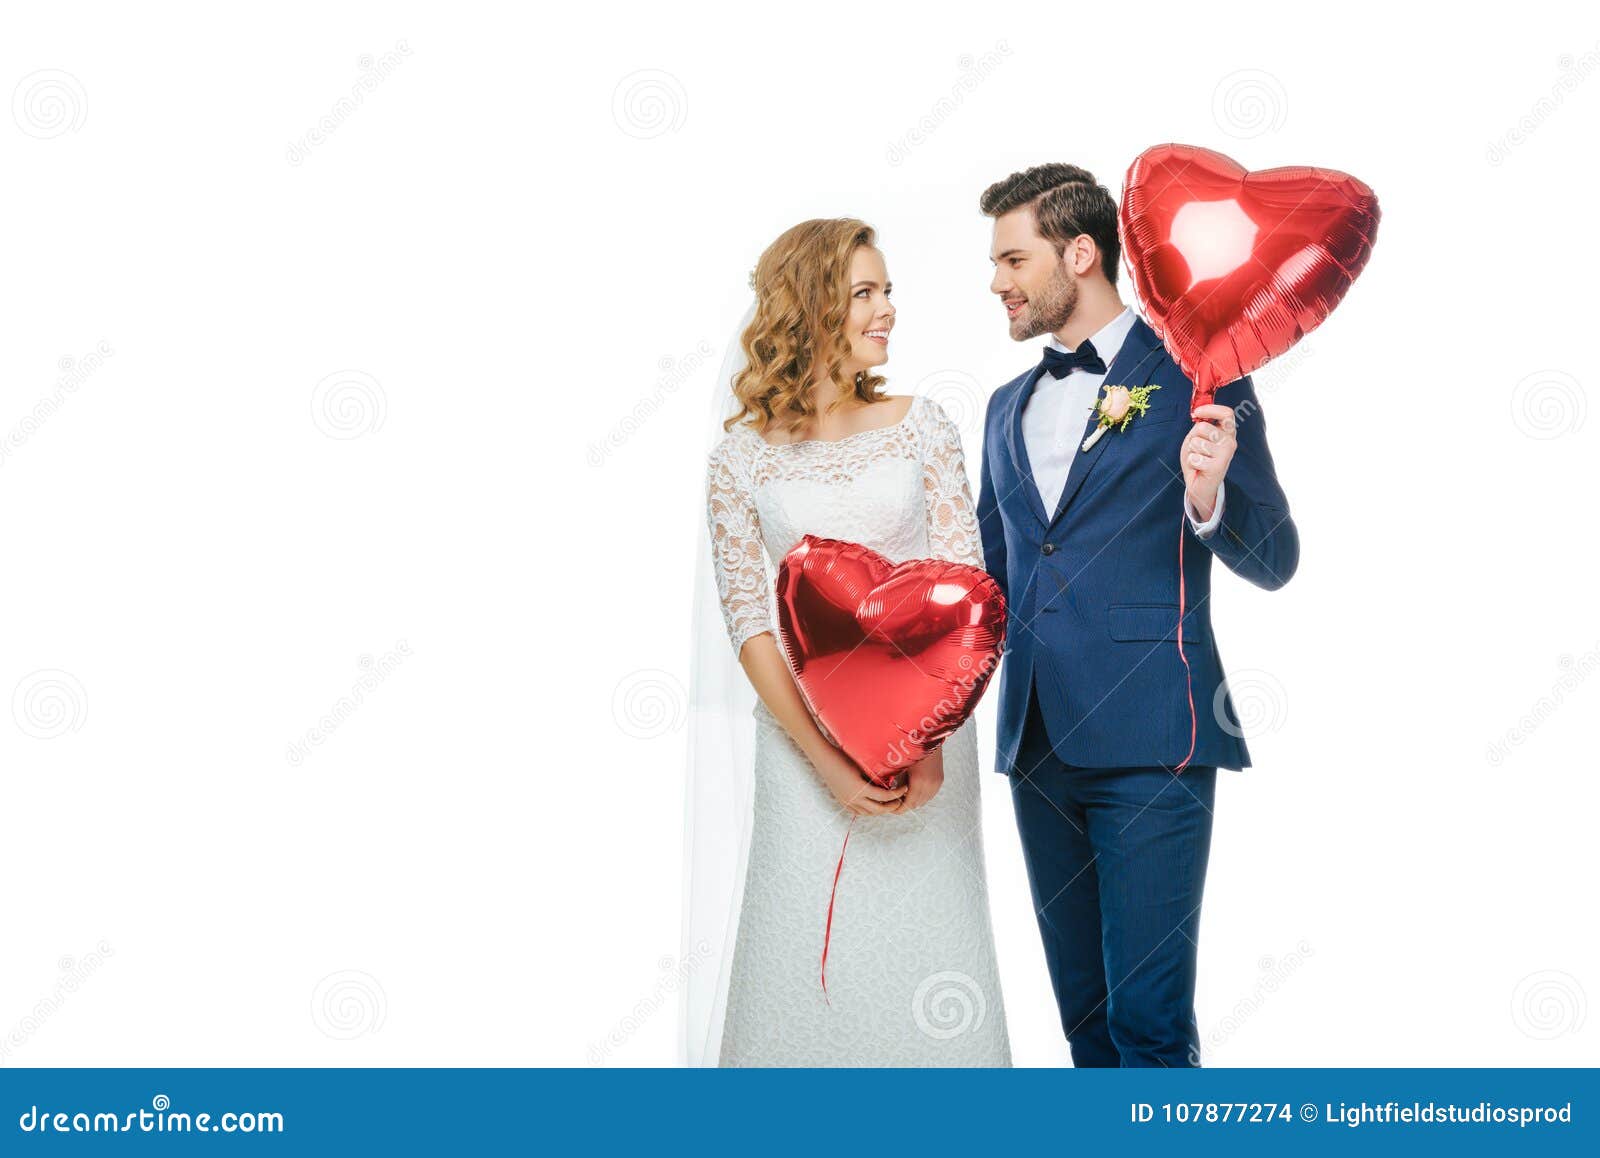 wedding couple with red heart d balloons